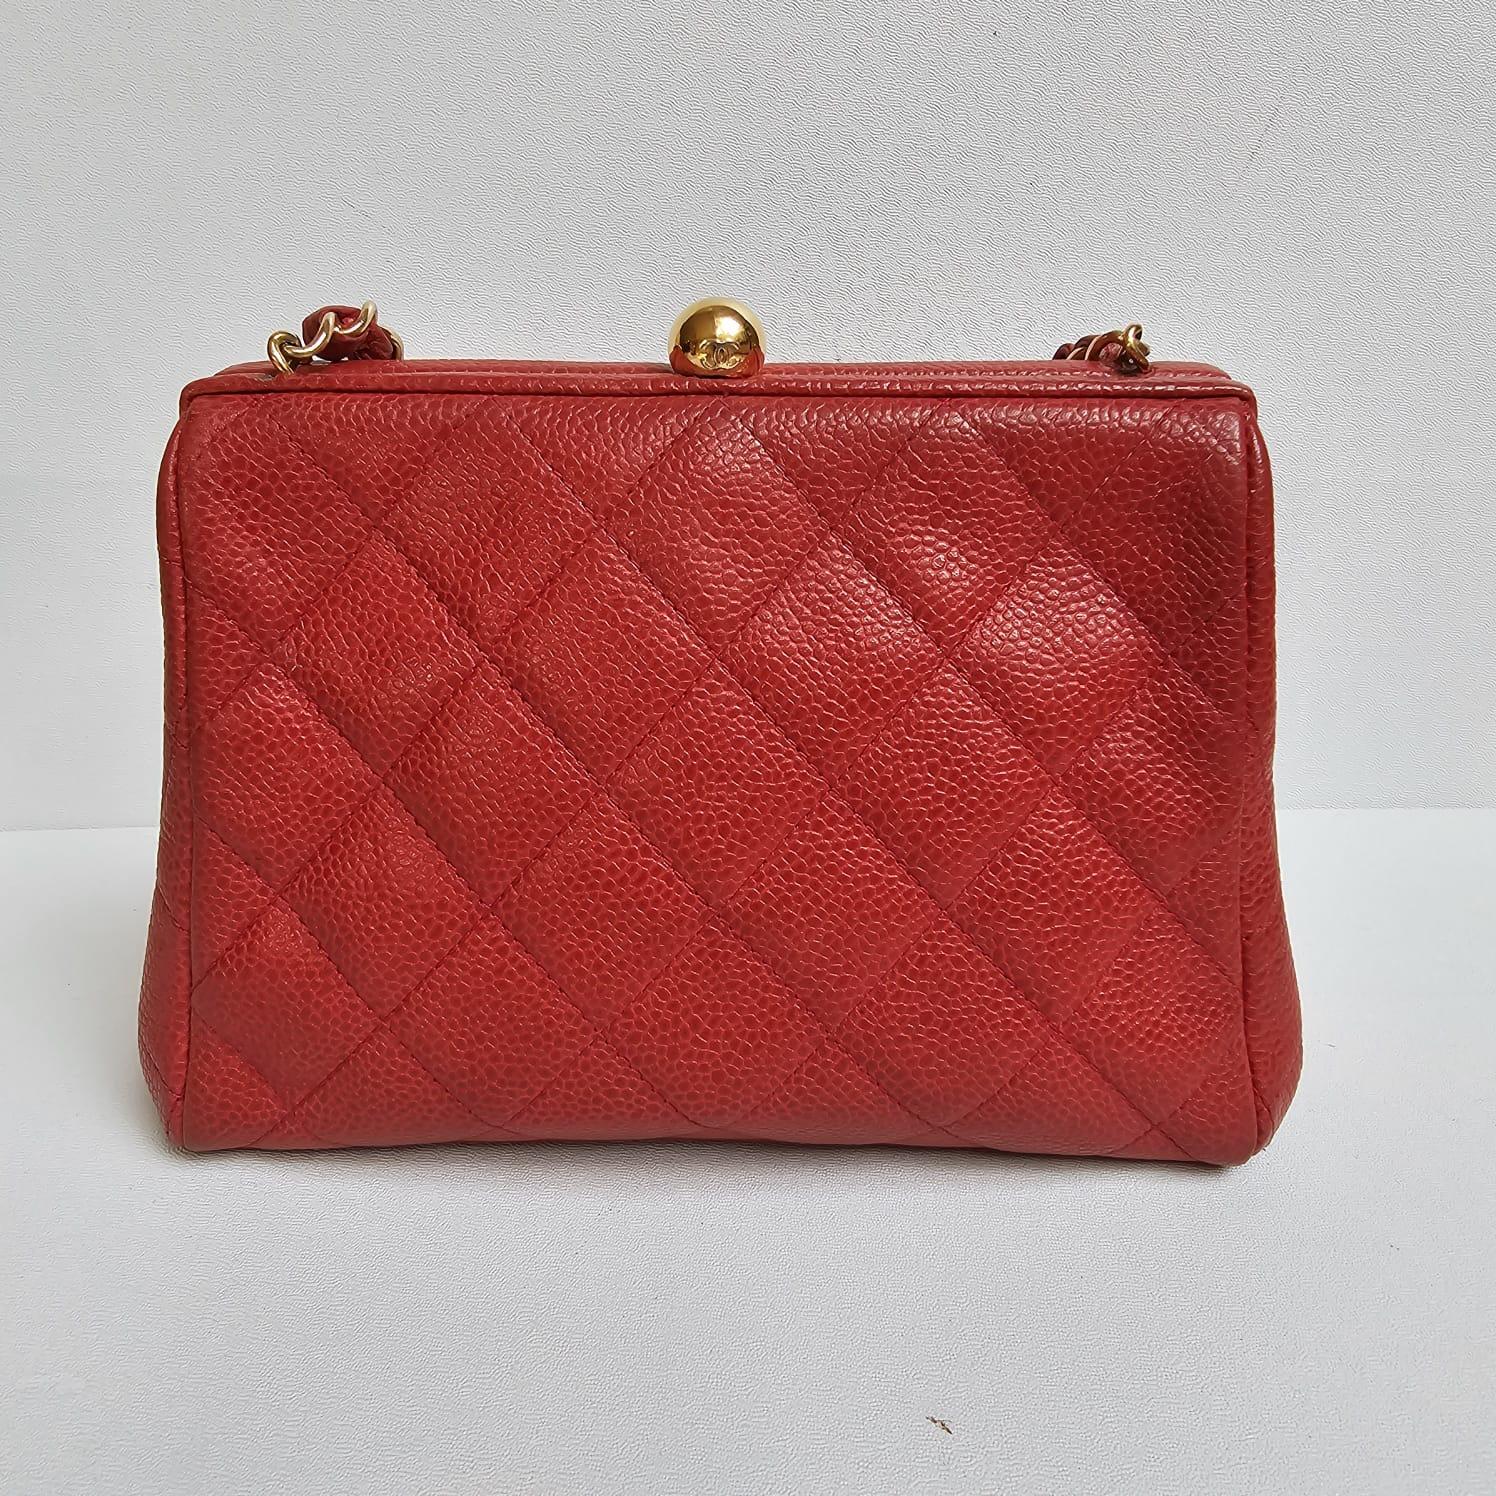 Vintage 1990s Chanel Red Caviar Quilted Mini Purse Sling Bag In Good Condition For Sale In Jakarta, Daerah Khusus Ibukota Jakarta